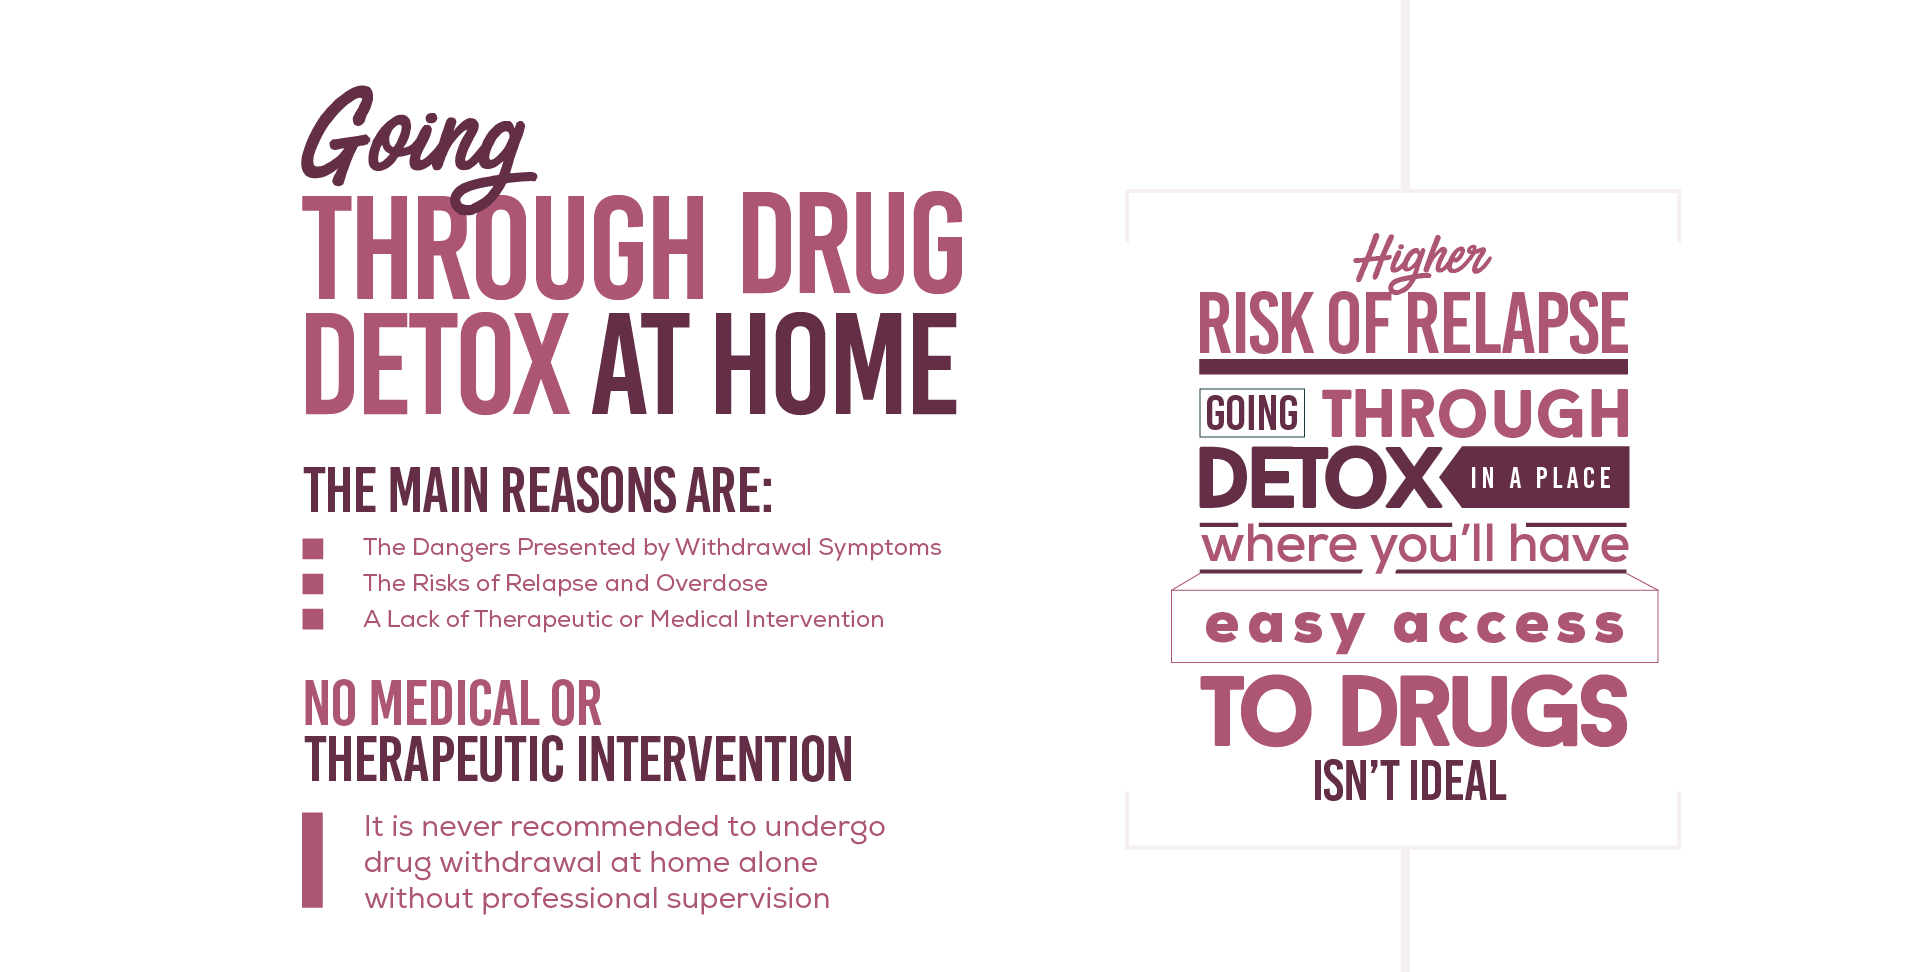 disadvantages of going through drug detox at home includes, the dangers presented by withdrawal symptoms, the risks of relapse and overdose,a lack of therapeutic or medical intervention. It is never recommended to undergo drug withdrawal at home alone without professional supervision.Going through detox in a place where you will have easy access to drugs is not ideal.